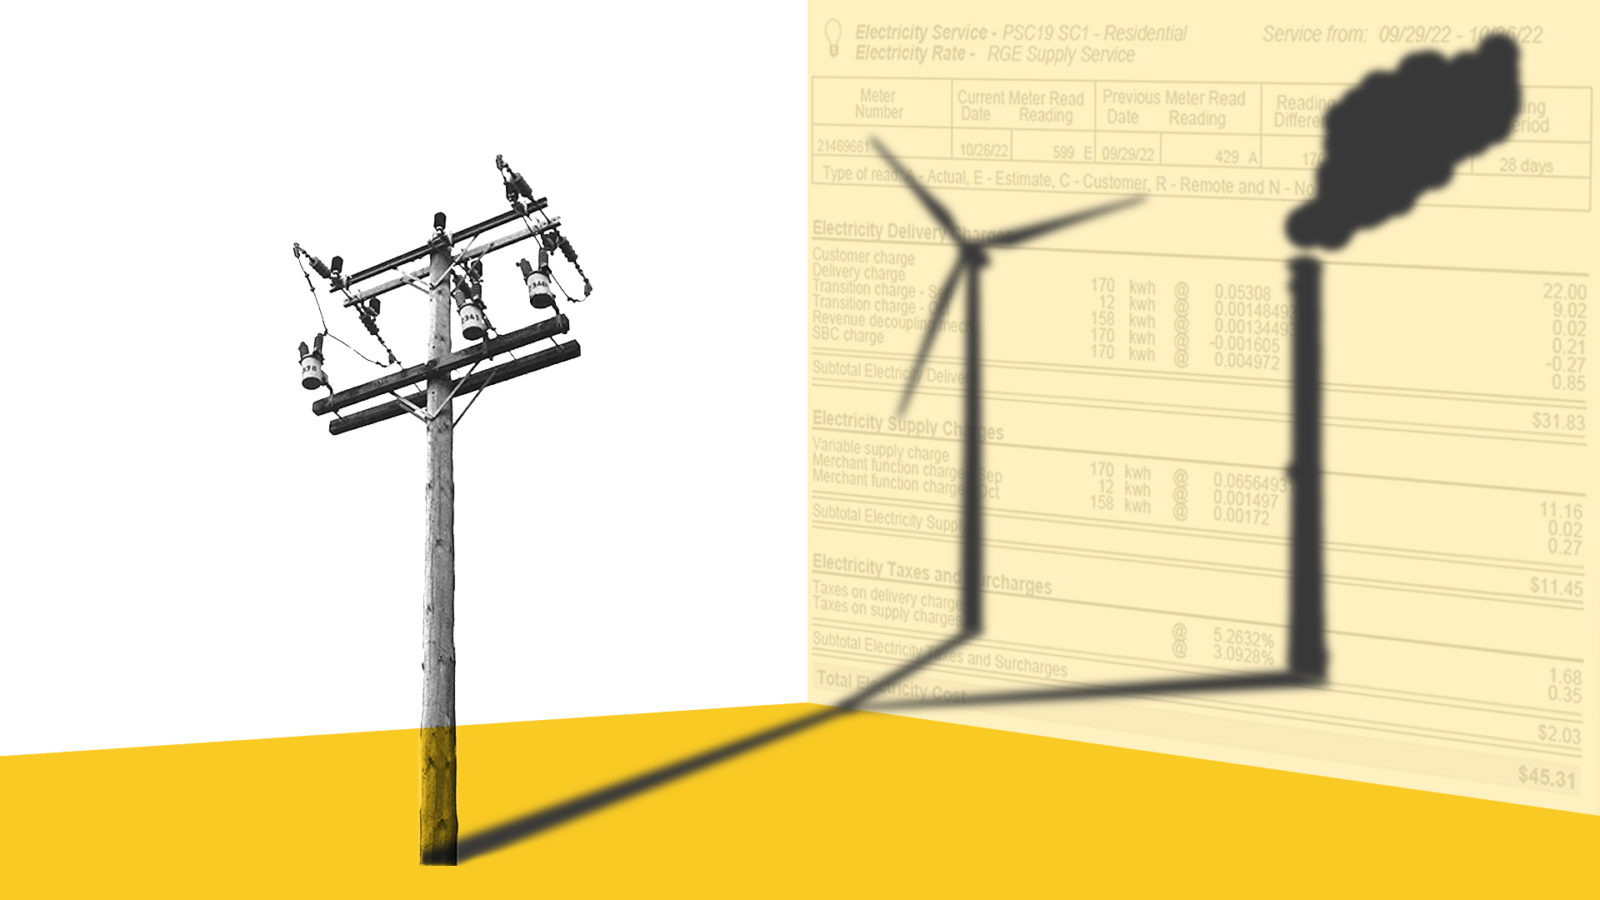 Image of a telephone pole with a shadow diverging into a wind mill and a smoke stack on top of an electricity bill to represent green power programs